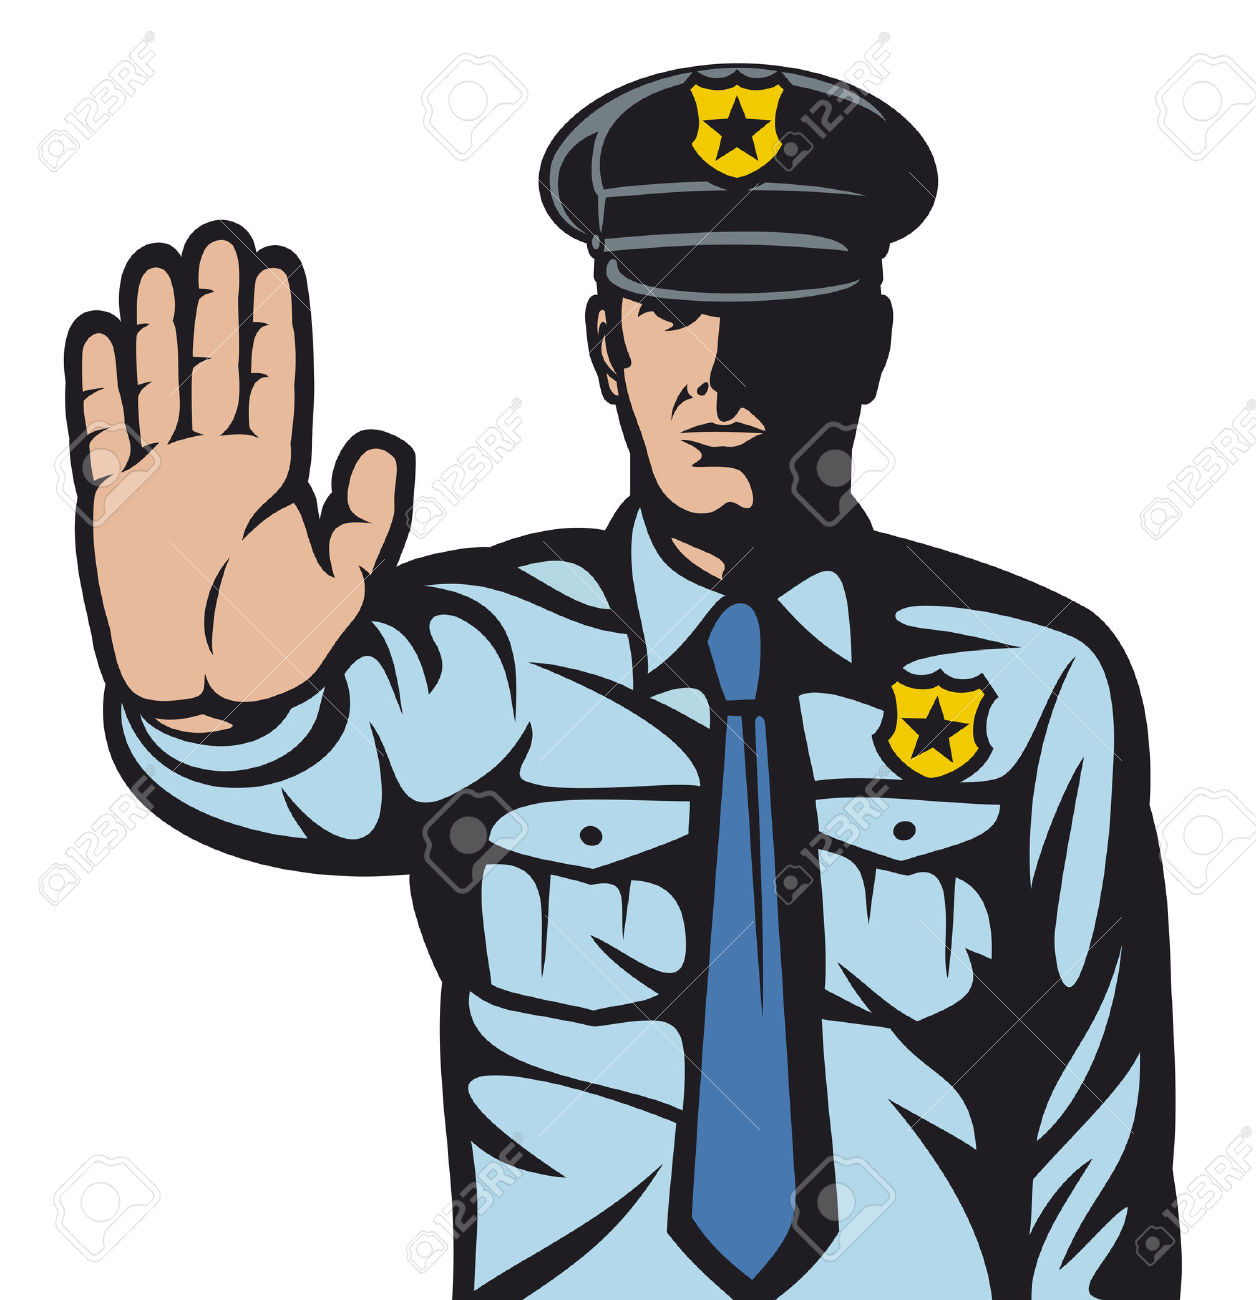 Cartoon officer free download. Cop clipart police stop